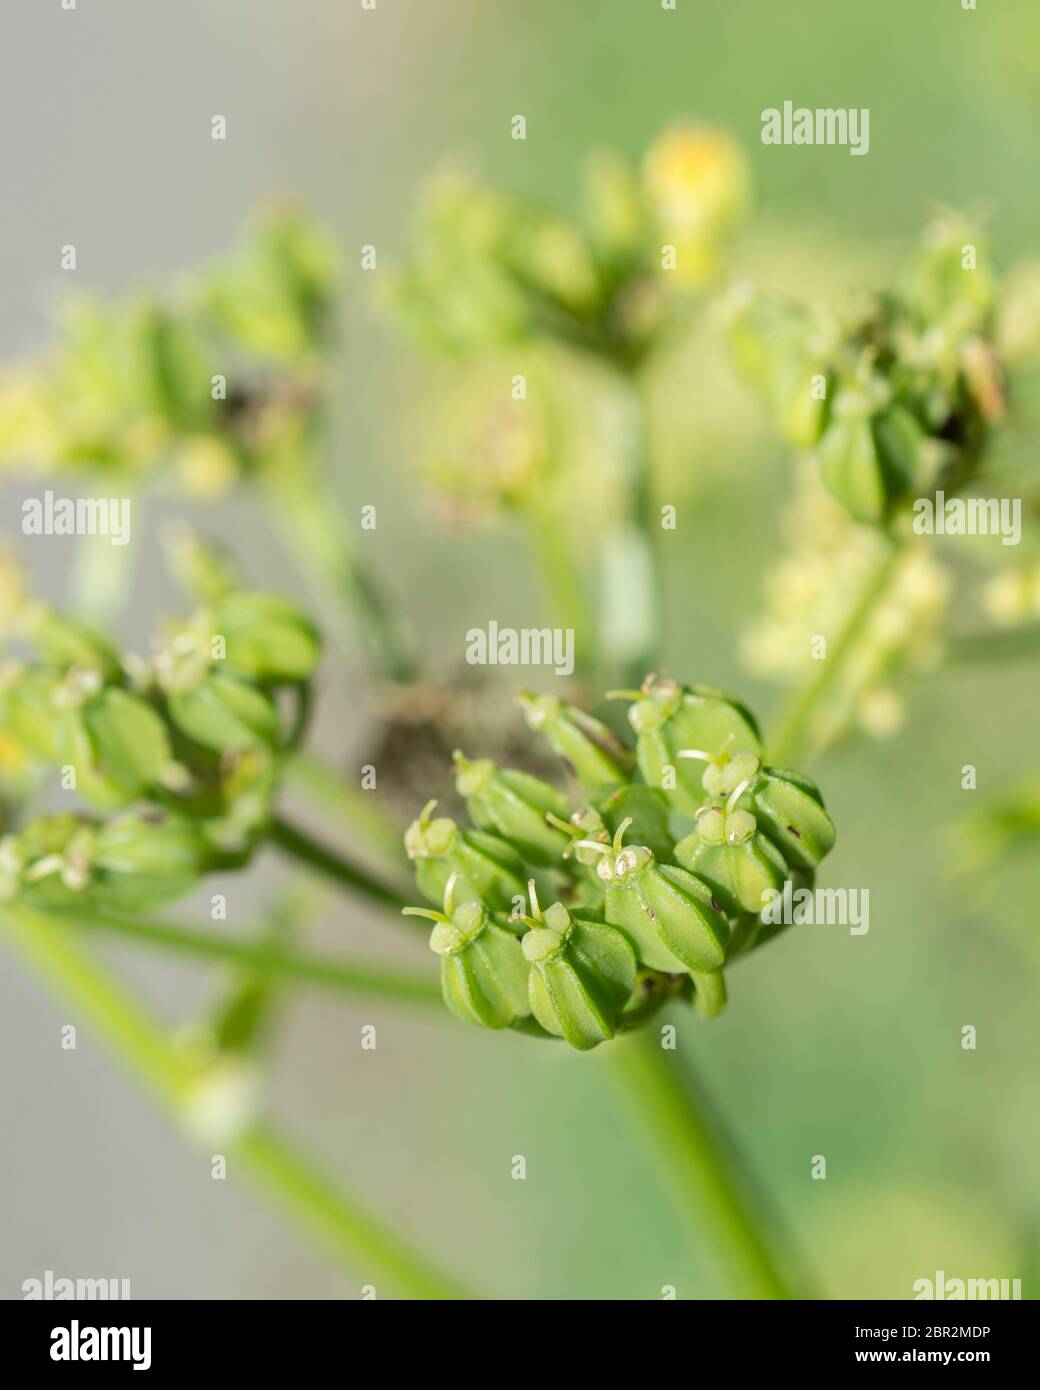 Macro shot green Alexanders / Smyrnium olusatrum seeds in hedgerow. Alexanders is foraged & once grown for food (seeds used in cooking). Umbellifers. Stock Photo